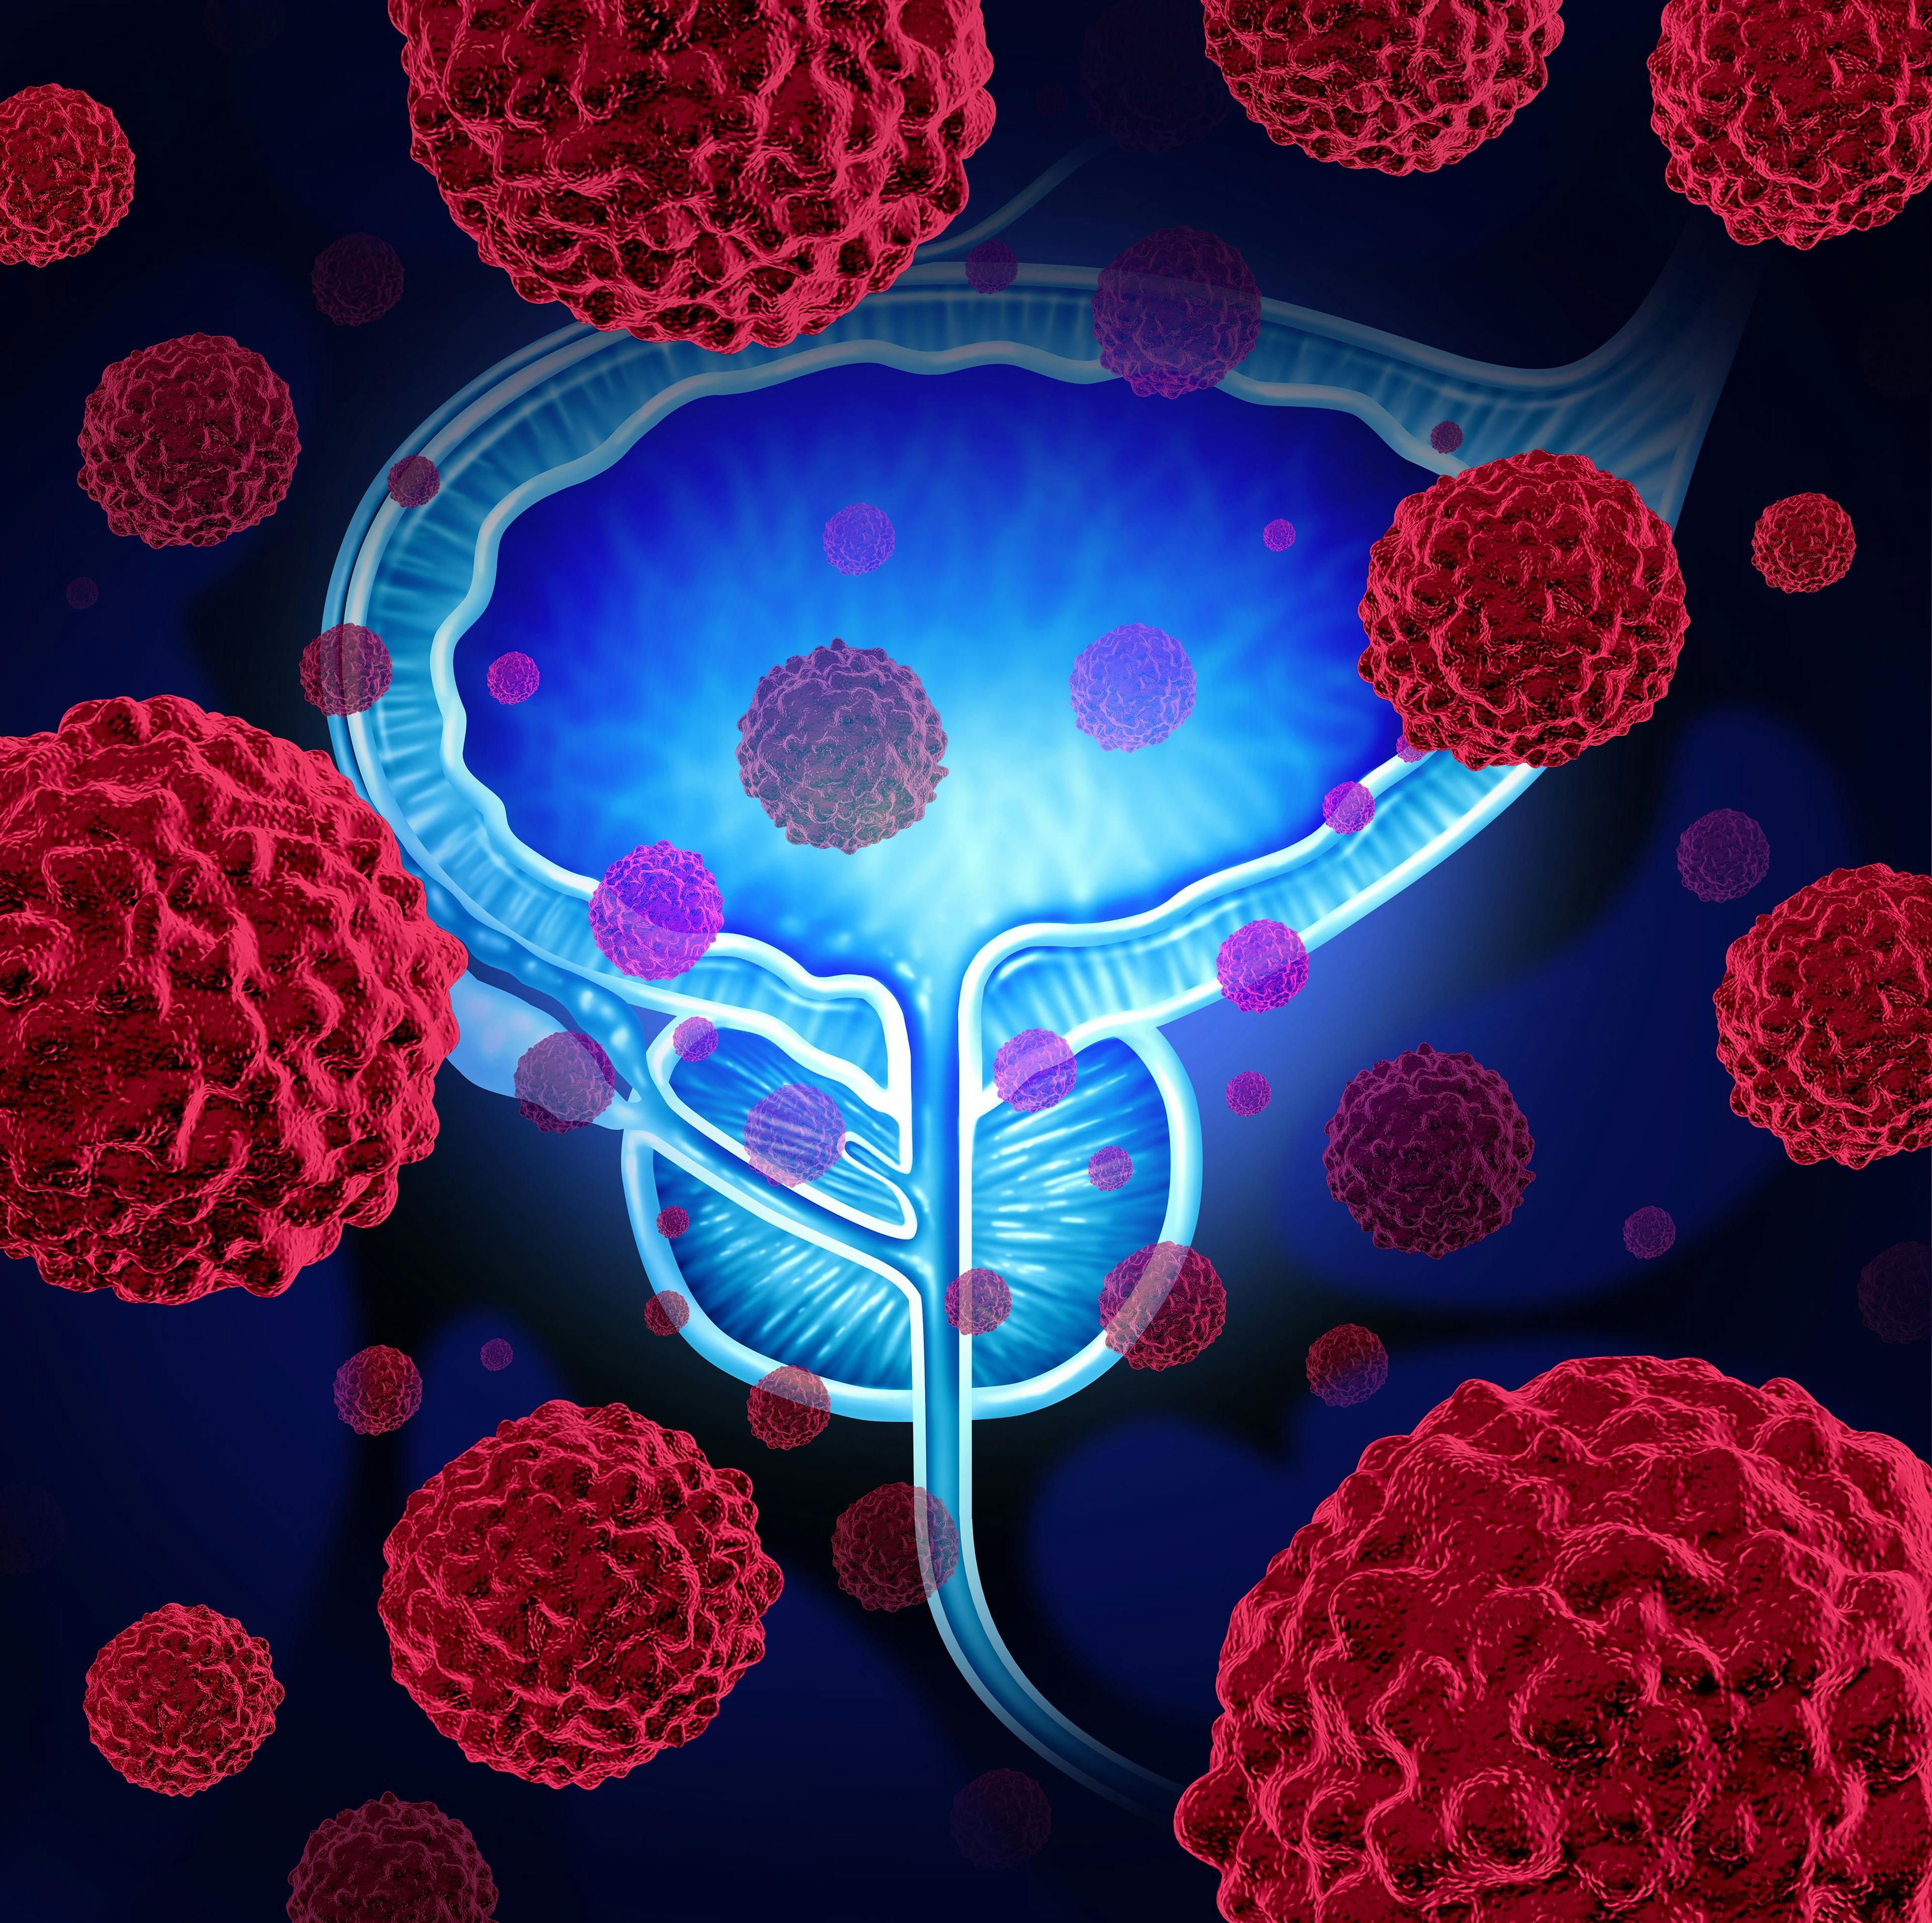 Theranostics has the potential to address micrometastatic disease in high-risk patients with prostate cancer